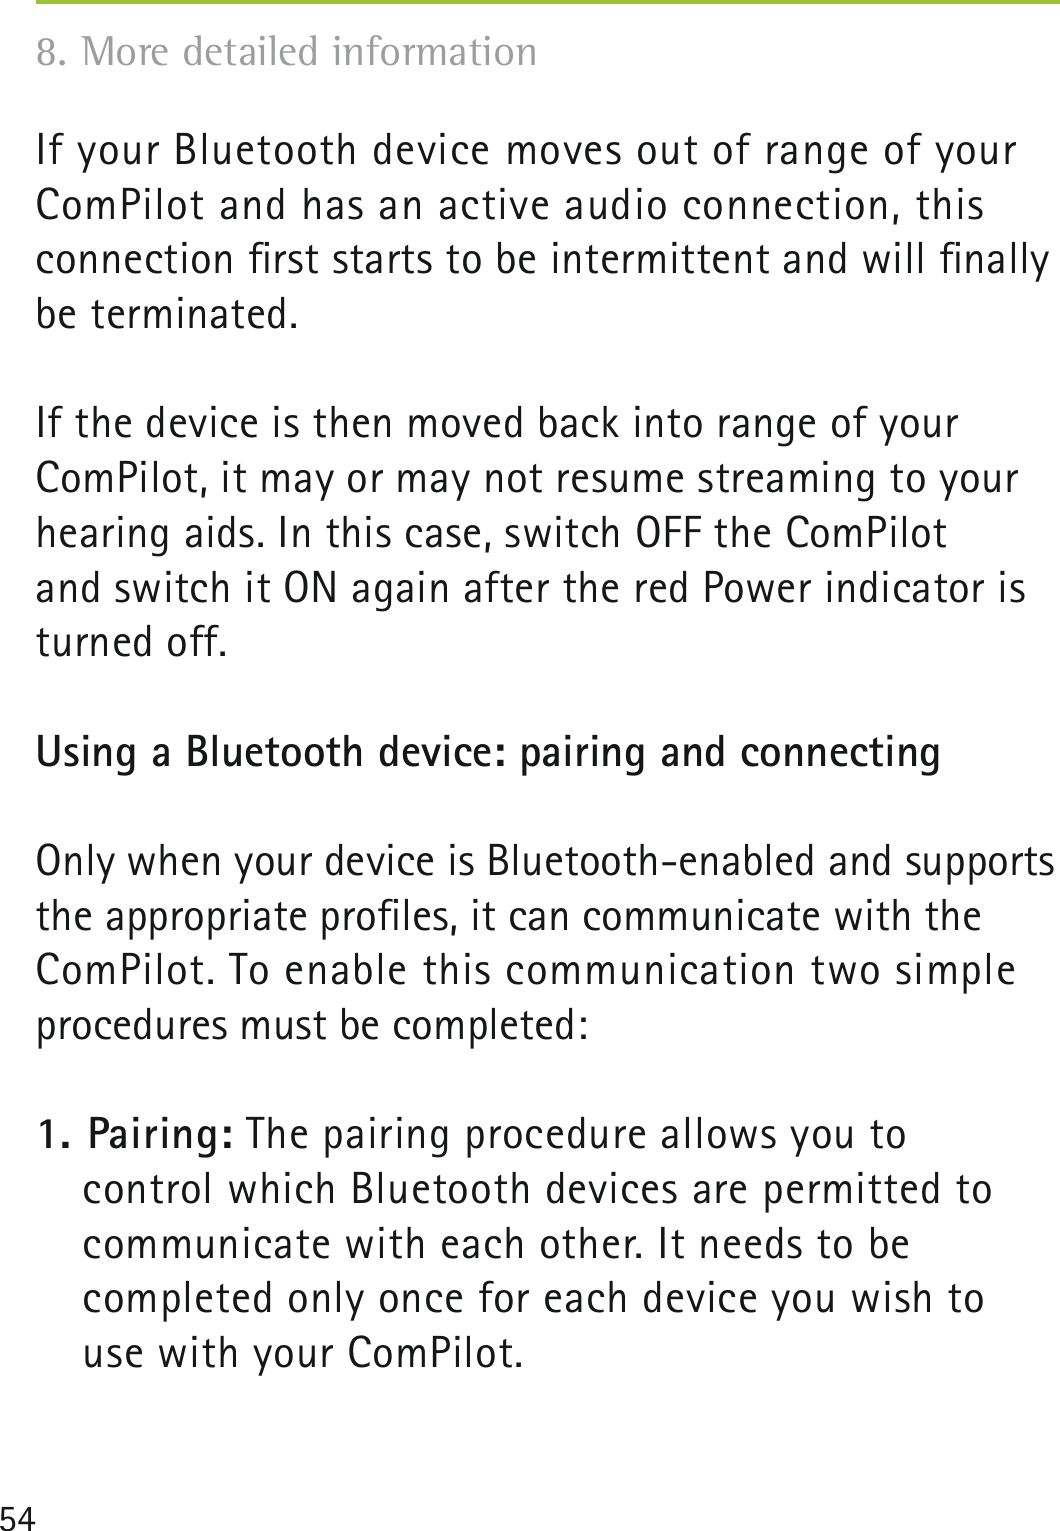 54If your Bluetooth device moves out of range of your ComPilot and has an active audio connection, this  connection ﬁrst starts to be intermittent and will ﬁnally be terminated. If the device is then moved back into range of your ComPilot, it may or may not resume streaming to your hearing aids. In this case, switch OFF the ComPilot  and switch it ON again after the red Power indicator is turned off.Using a Bluetooth device: pairing and connectingOnly when your device is Bluetooth-enabled and supports the appropriate proﬁles, it can communicate with the ComPilot. To enable this communication two simple  procedures must be completed: 1. Pairing: The pairing procedure allows you to  control which Bluetooth devices are permitted to communicate with each other. It needs to be  completed only once for each device you wish to  use with your ComPilot. 8. More detailed information 